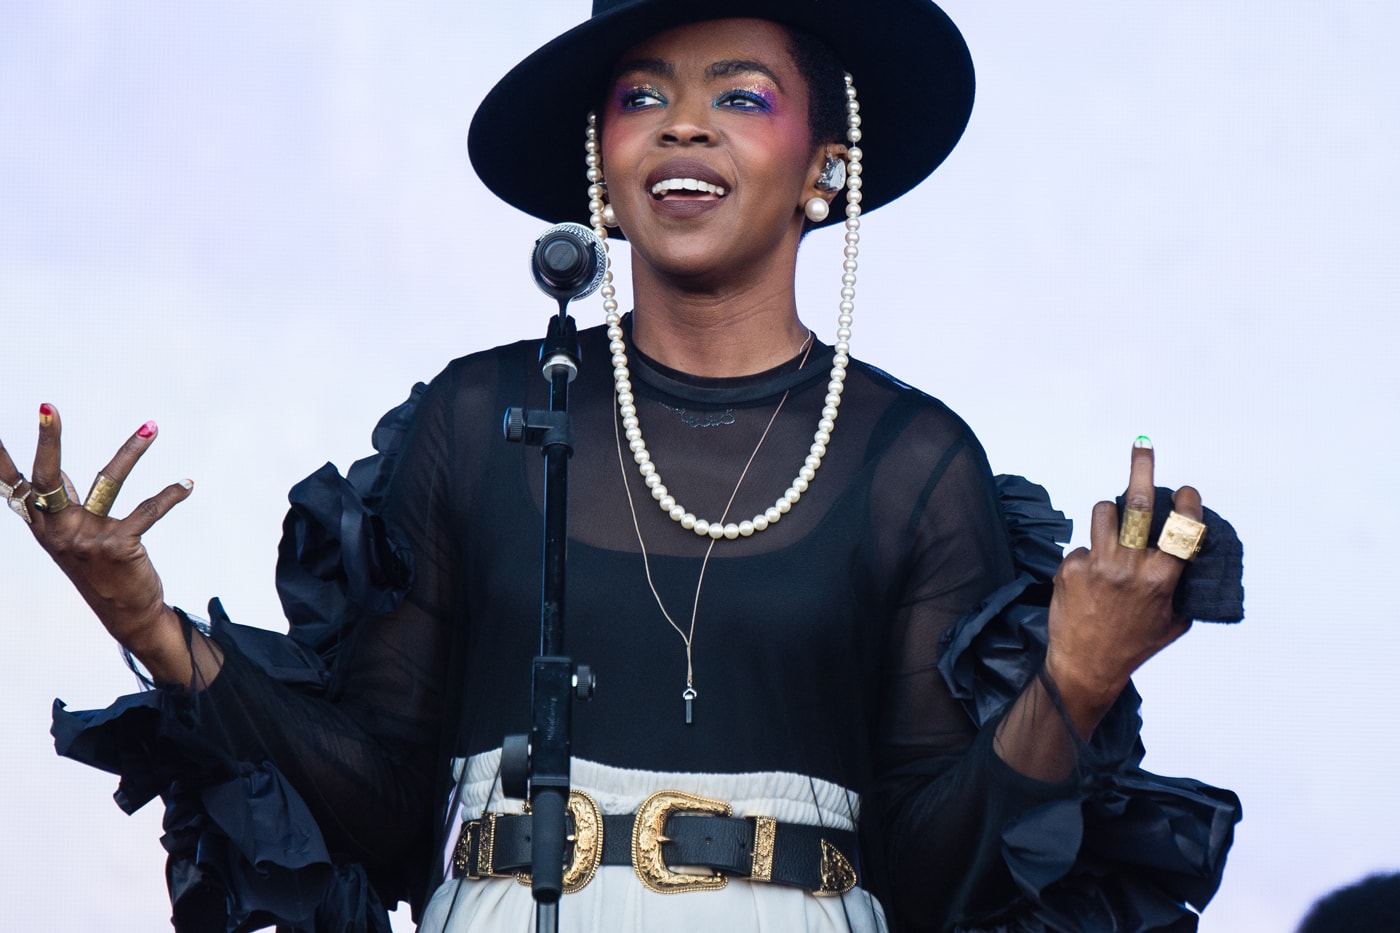 lauryn-hill-speaks-on-her-recent-performance-styles-video